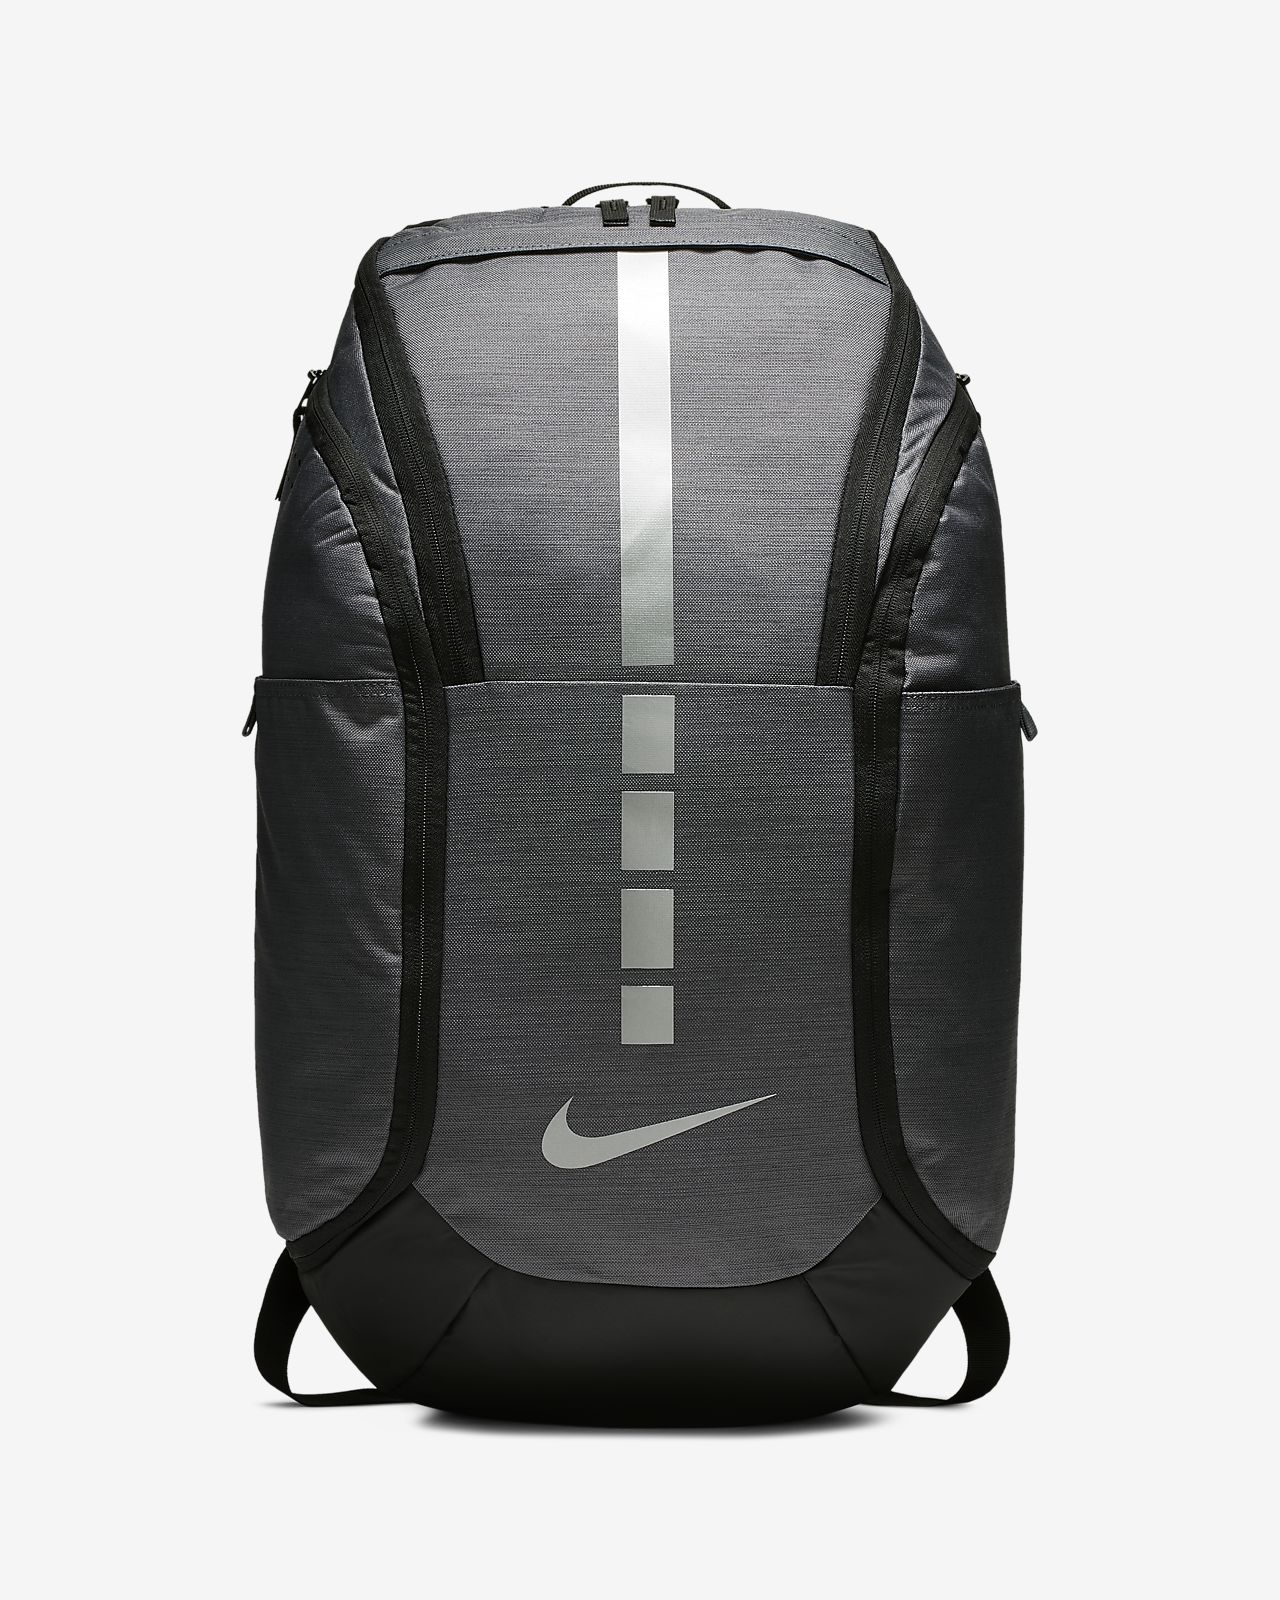 nike elite backpack price Sale,up to 31 